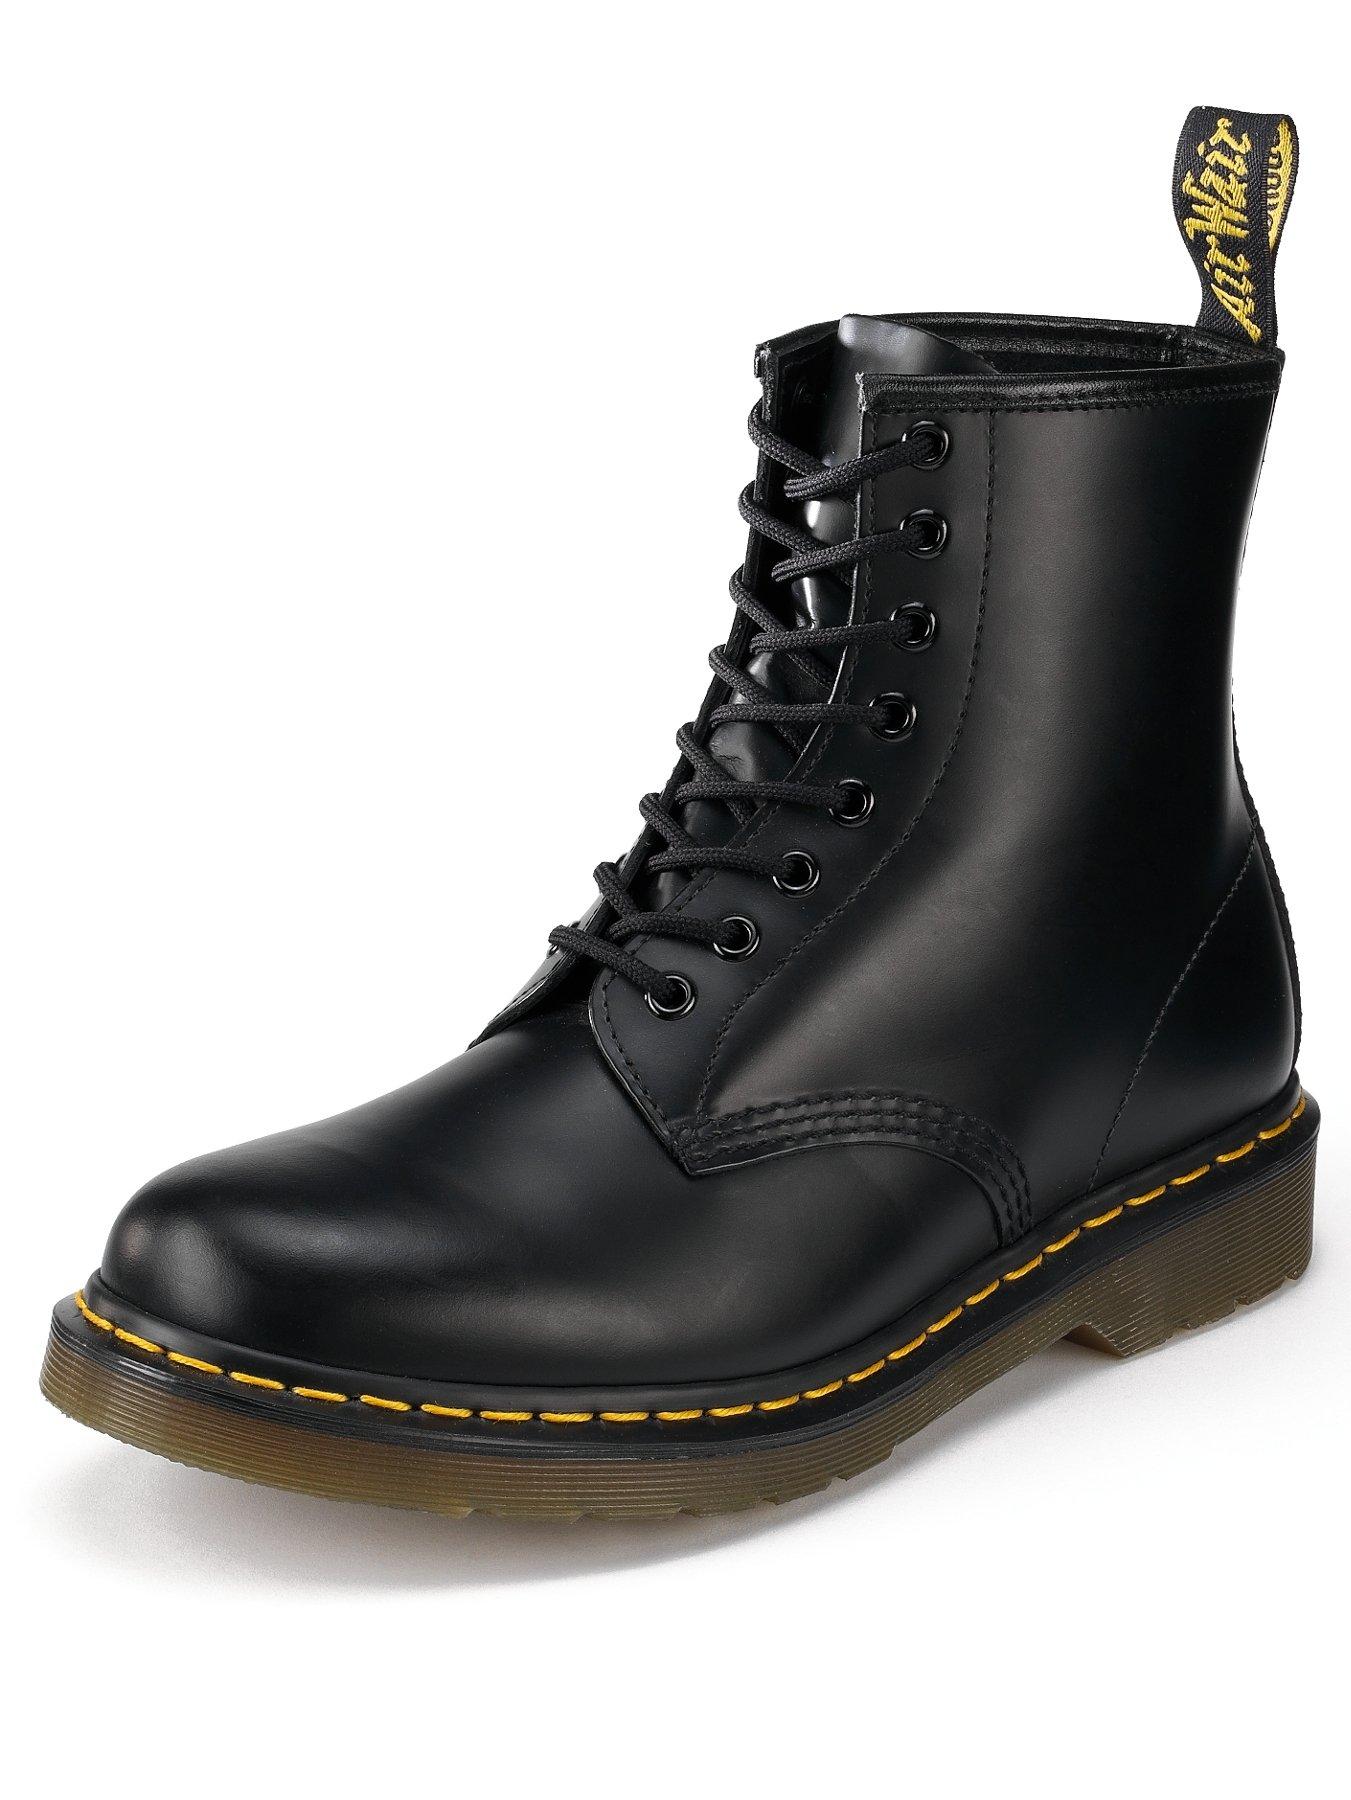 Dr Martens 1460 Smooth Boots - Black | very.co.uk